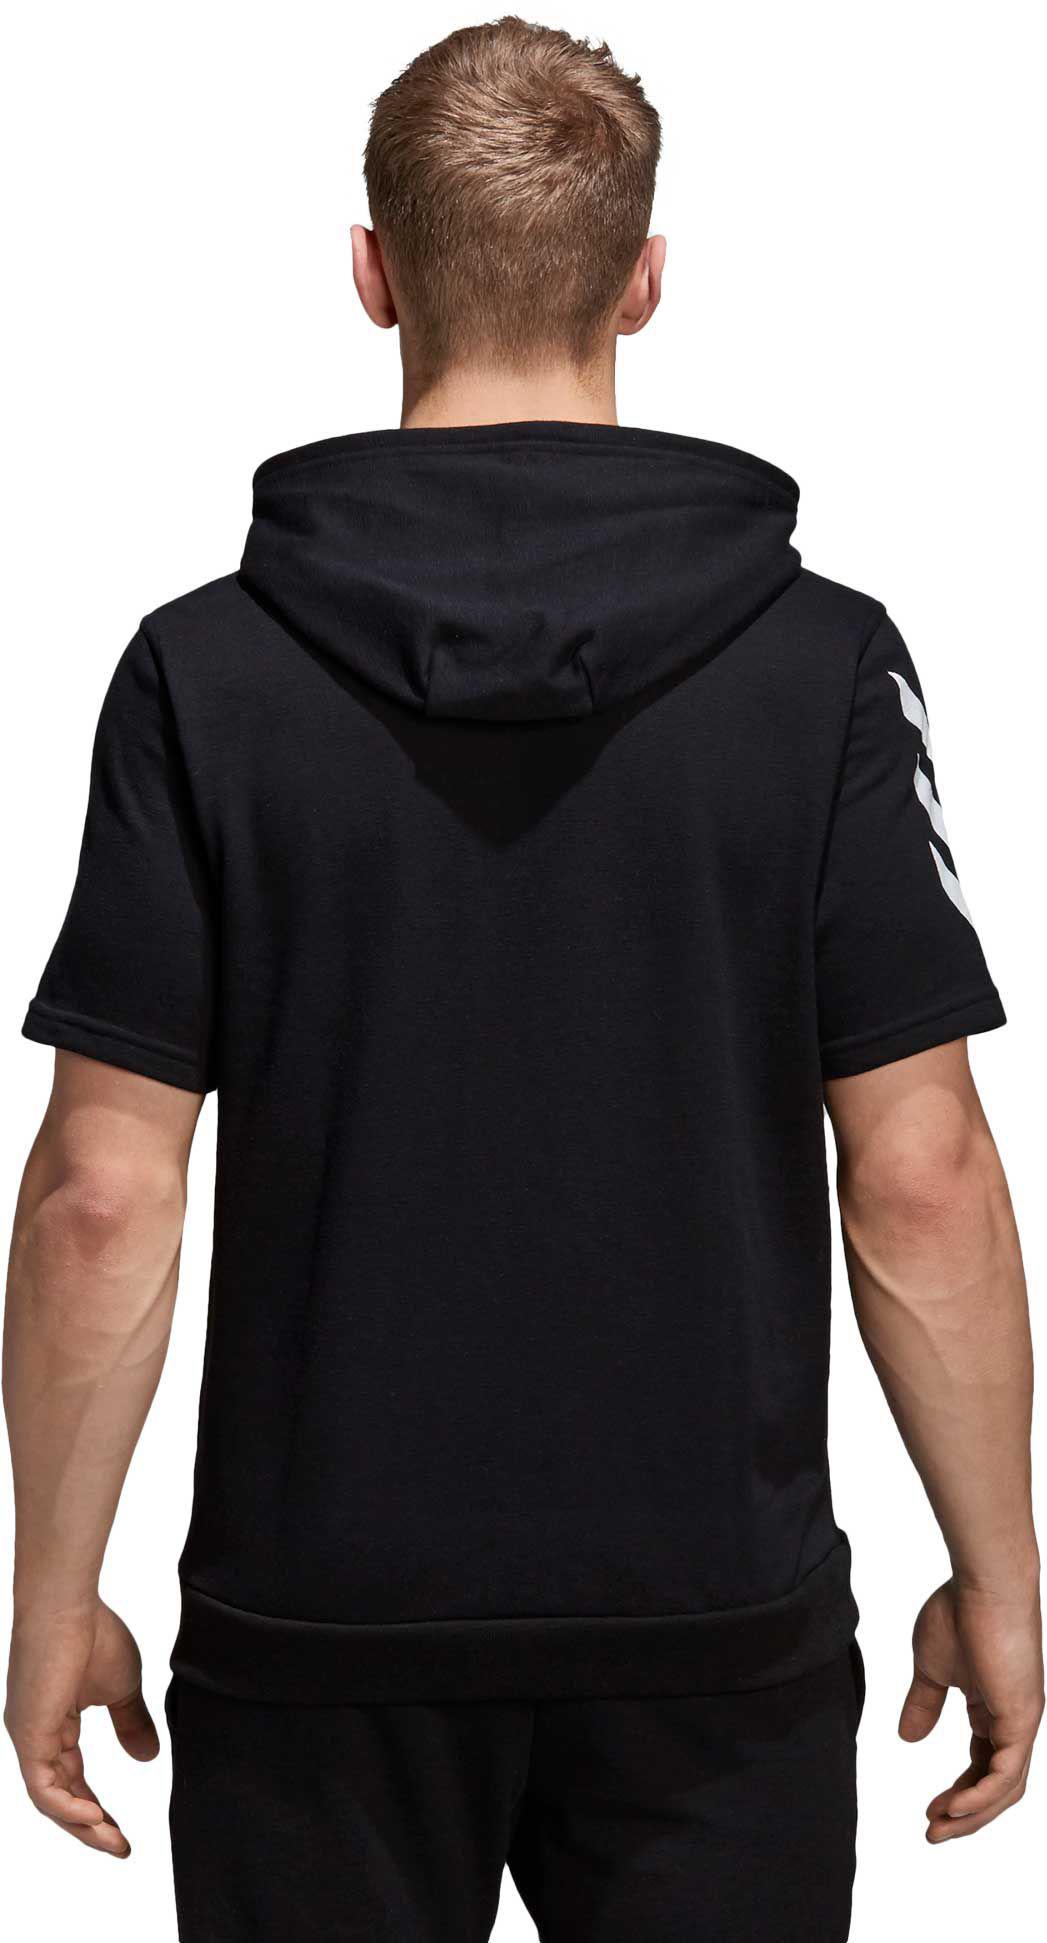 adidas Cotton Pickup Shooter Short Sleeve Hoodie in Black for Men - Lyst